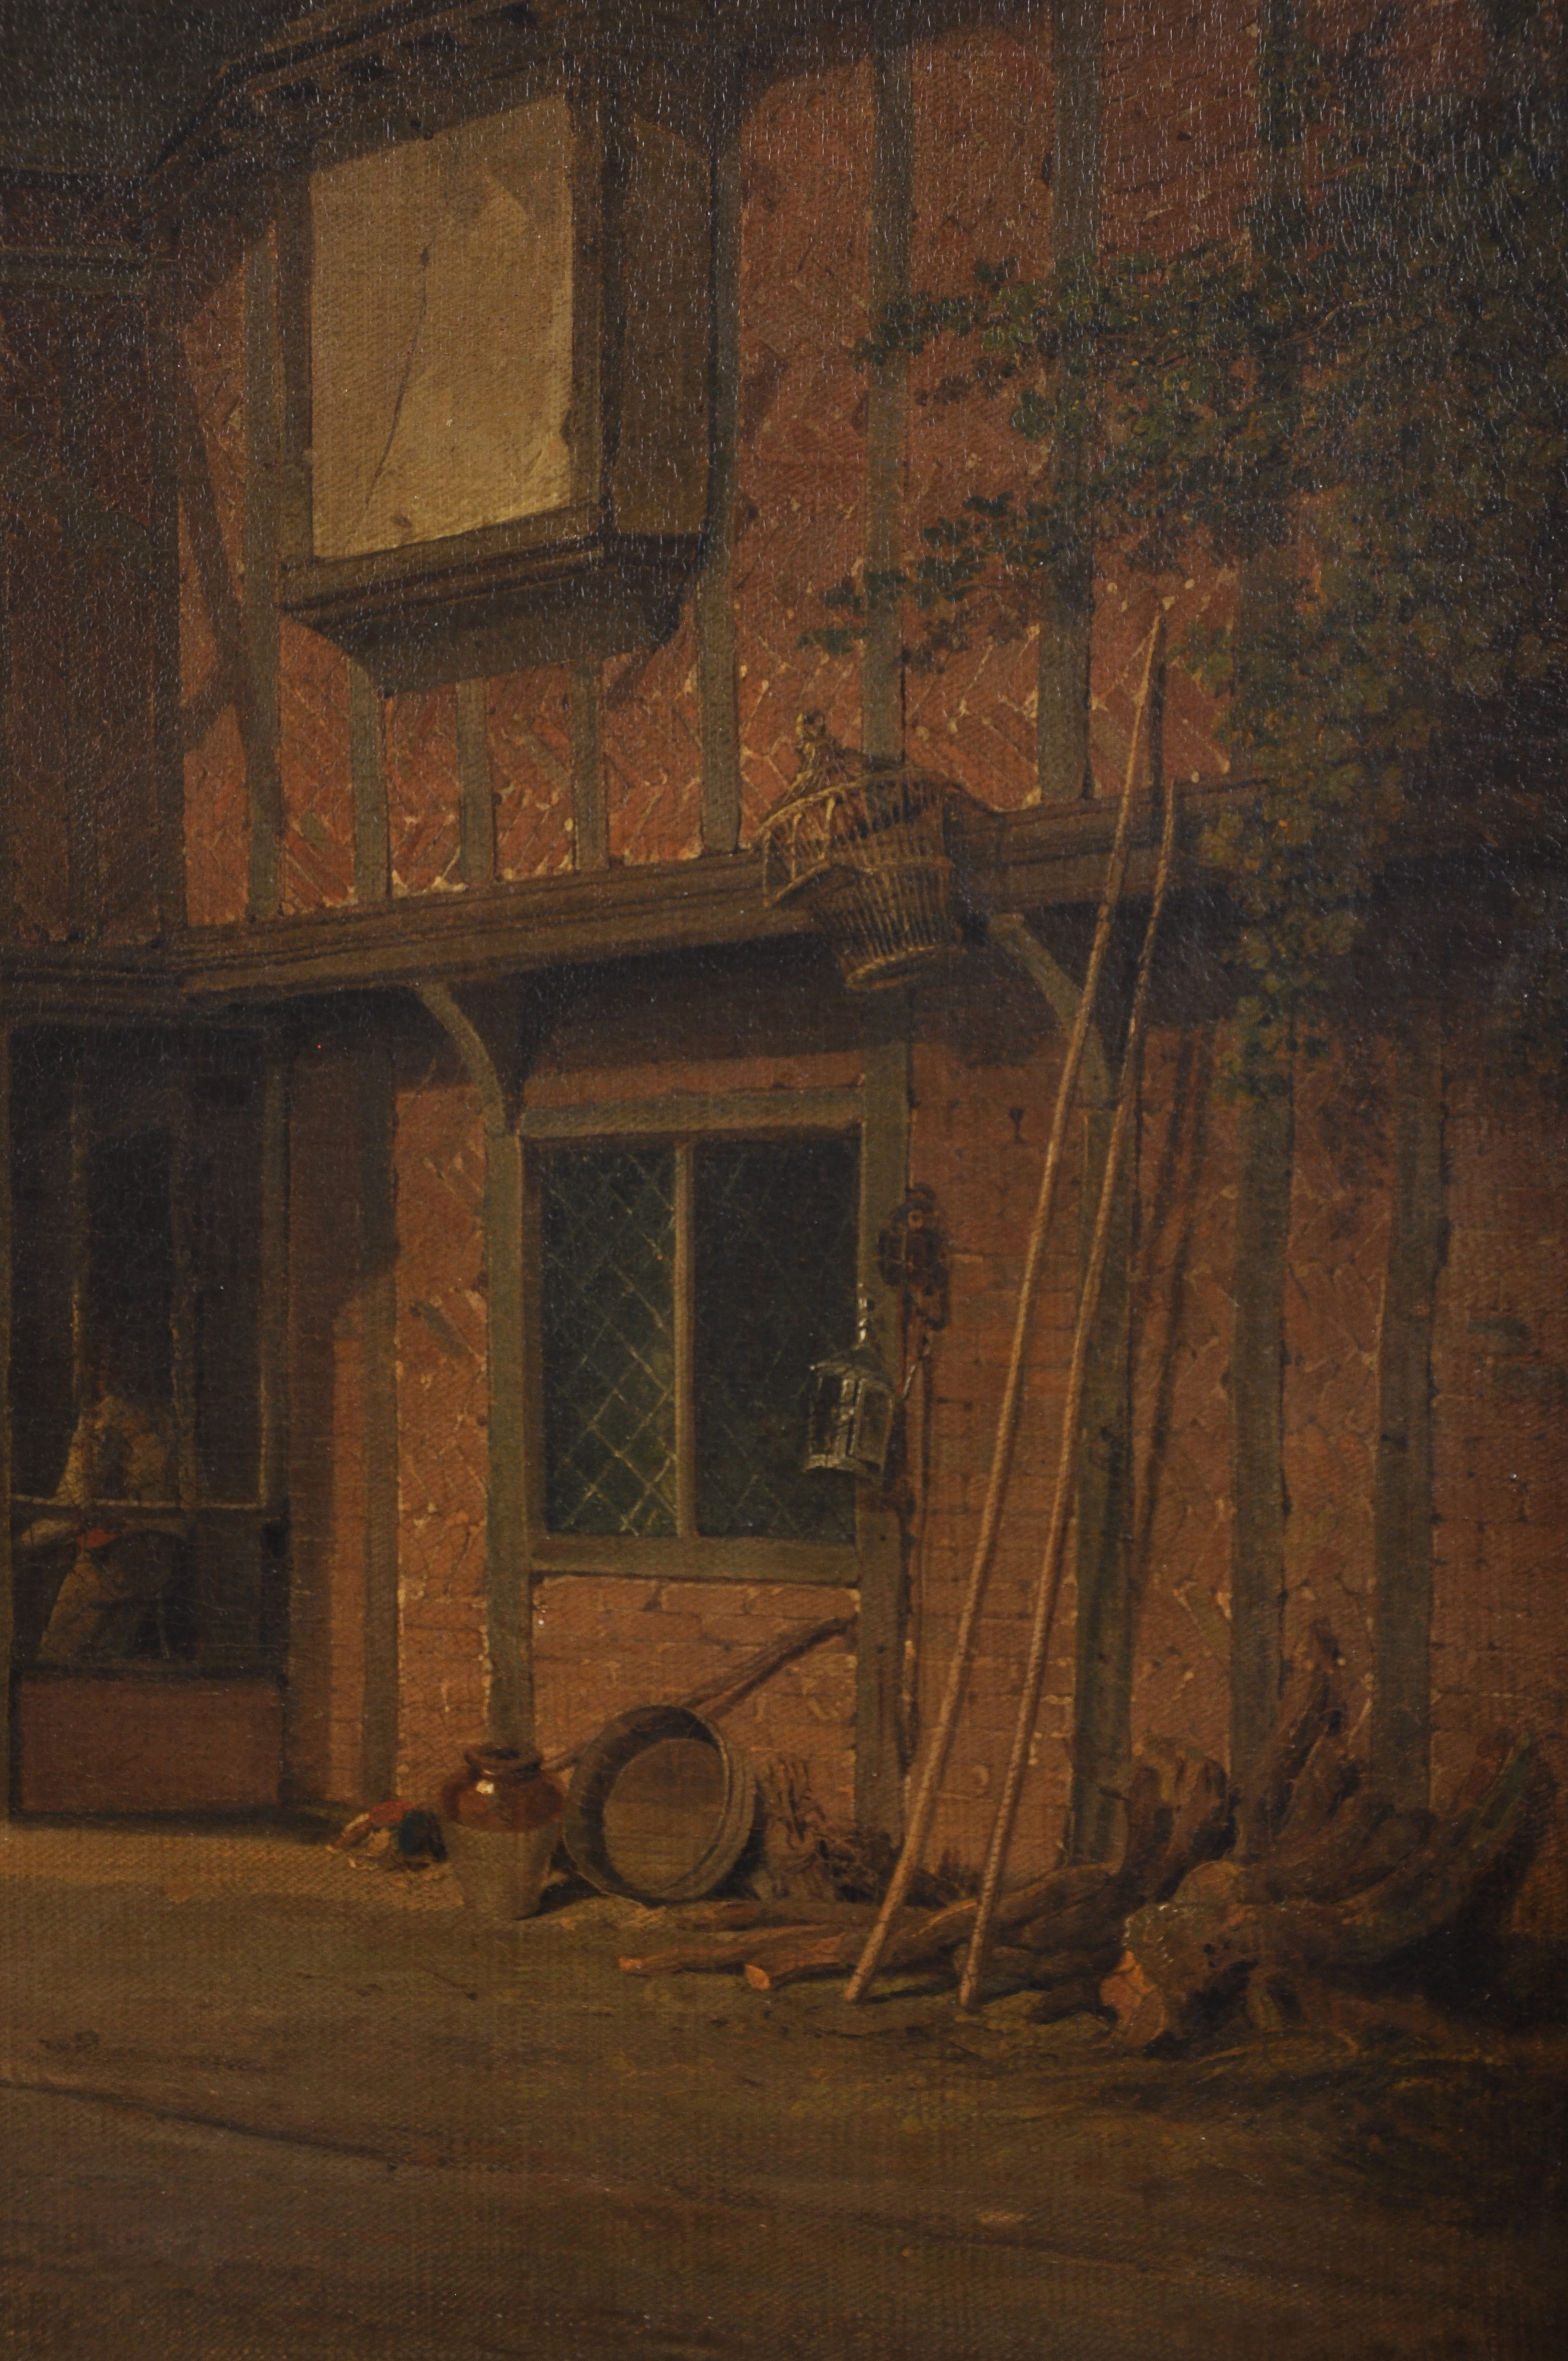 Andrew Wilson (1780-1848) British. “A View of The Bell Inn Hurley, Herts”, with Figures and Dogs - Image 5 of 9